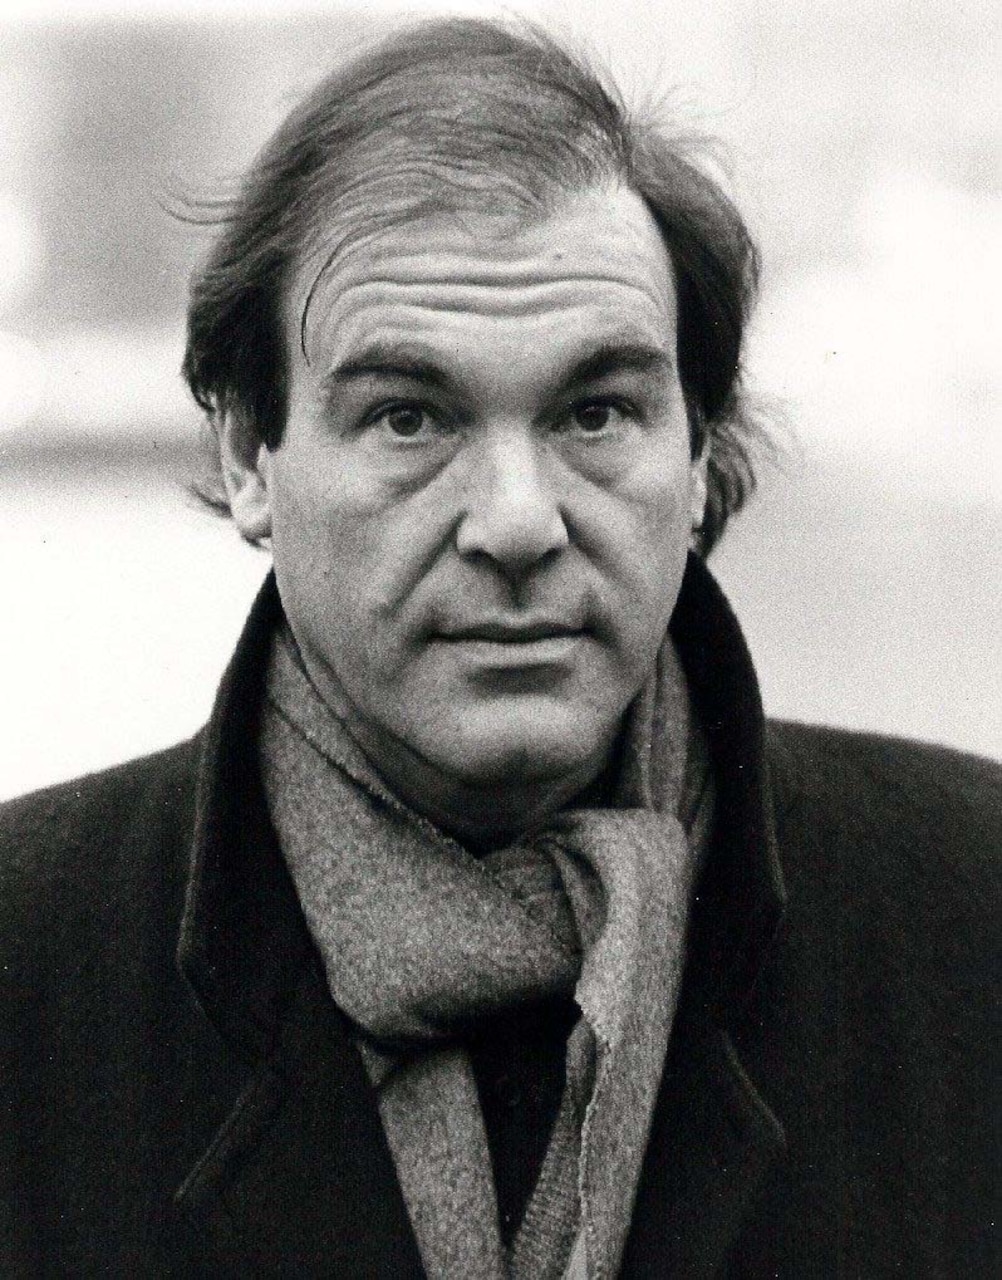 A man in a scarf poses for a photo.